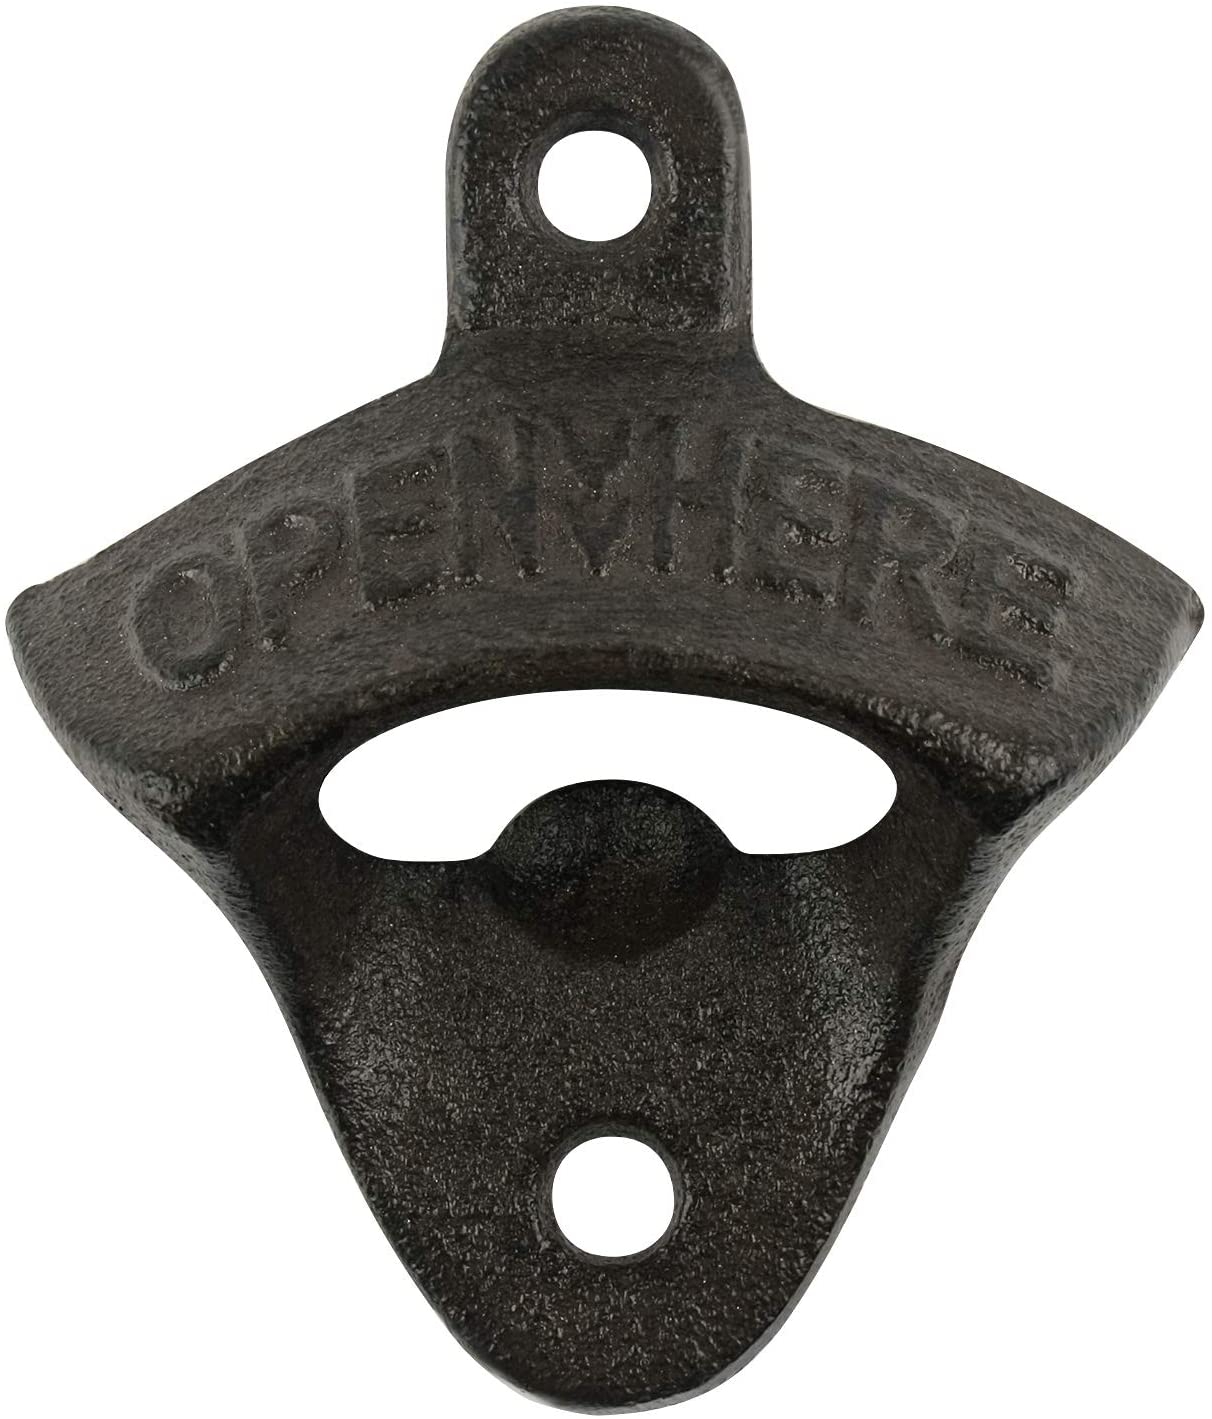 BOTTLE OPENER 'REAL ALE HULL BREWERY' CAST IRON WALL MOUNTED FIXINGS  FREE P&P 